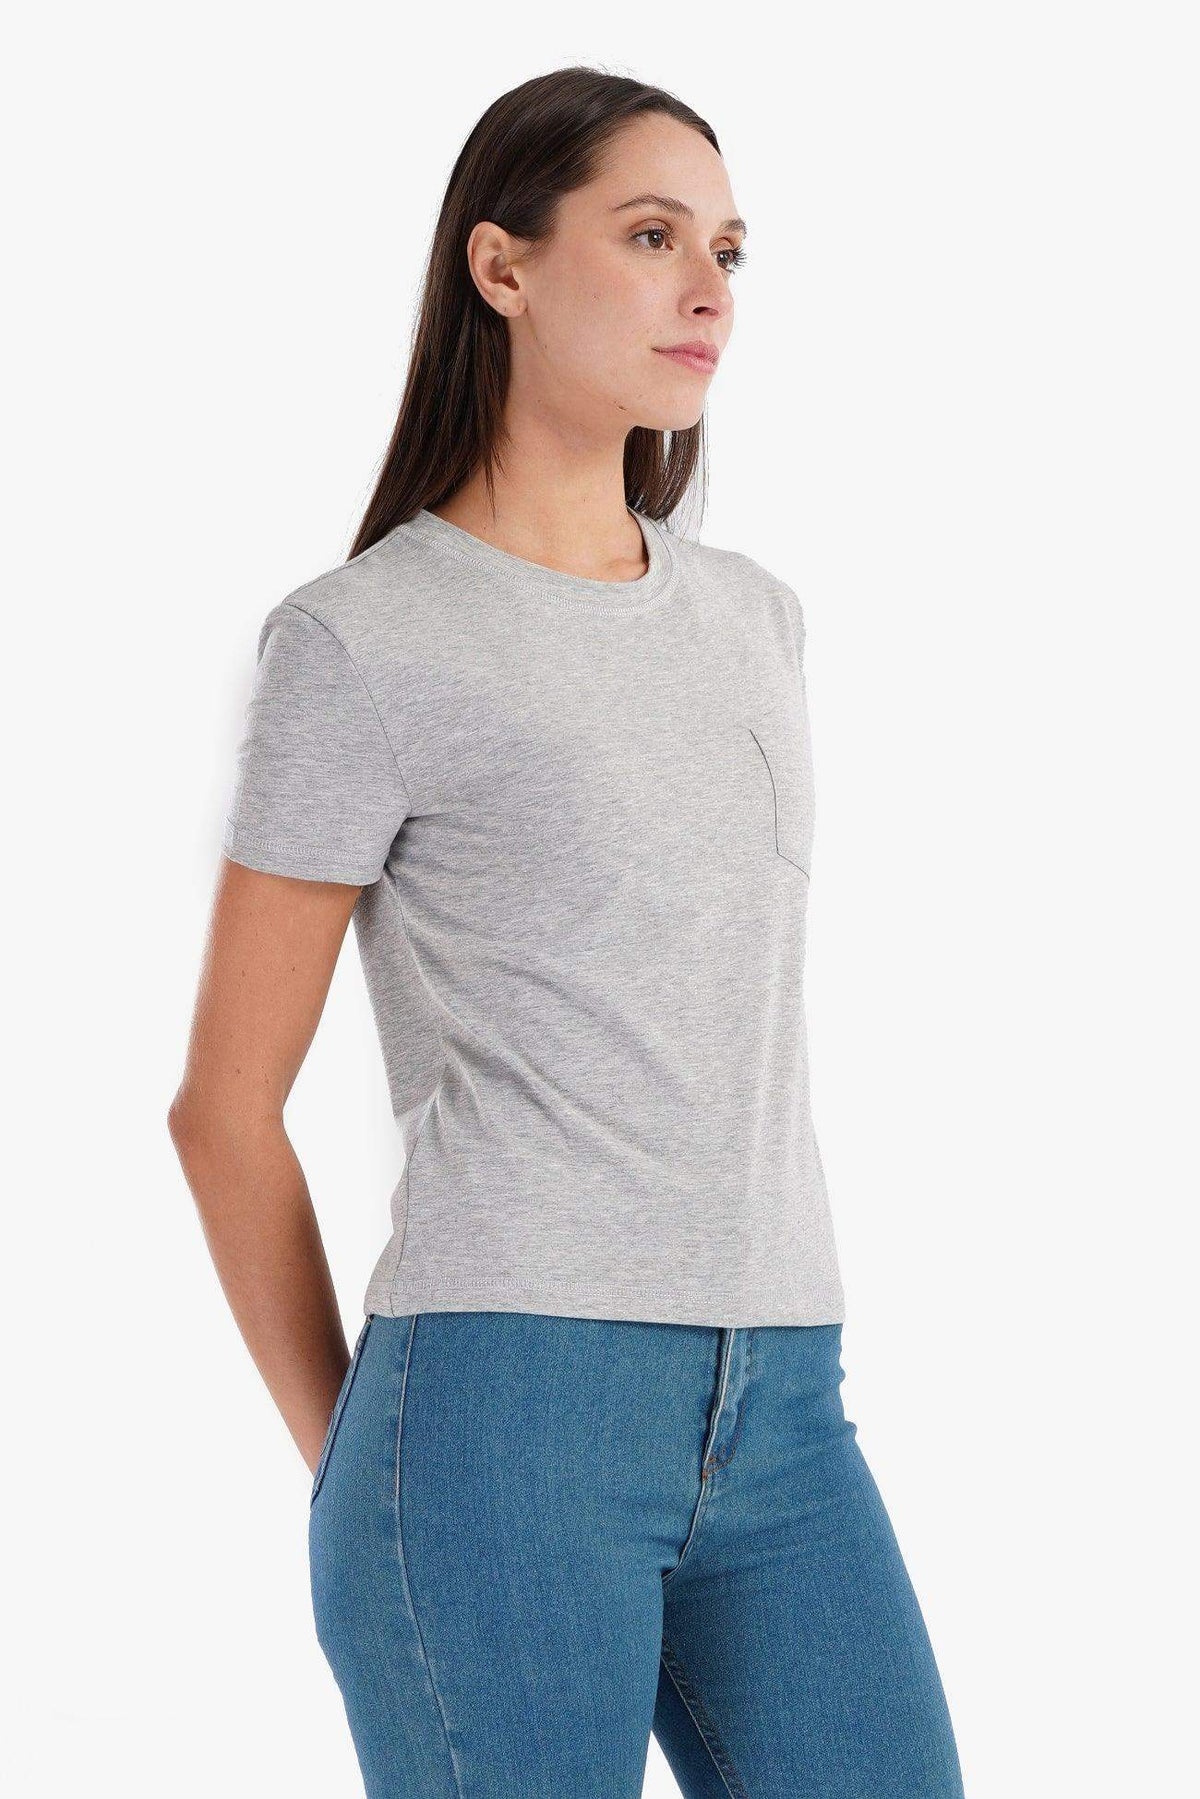 Cotton T-Shirt with Chest Pocket - Carina - كارينا